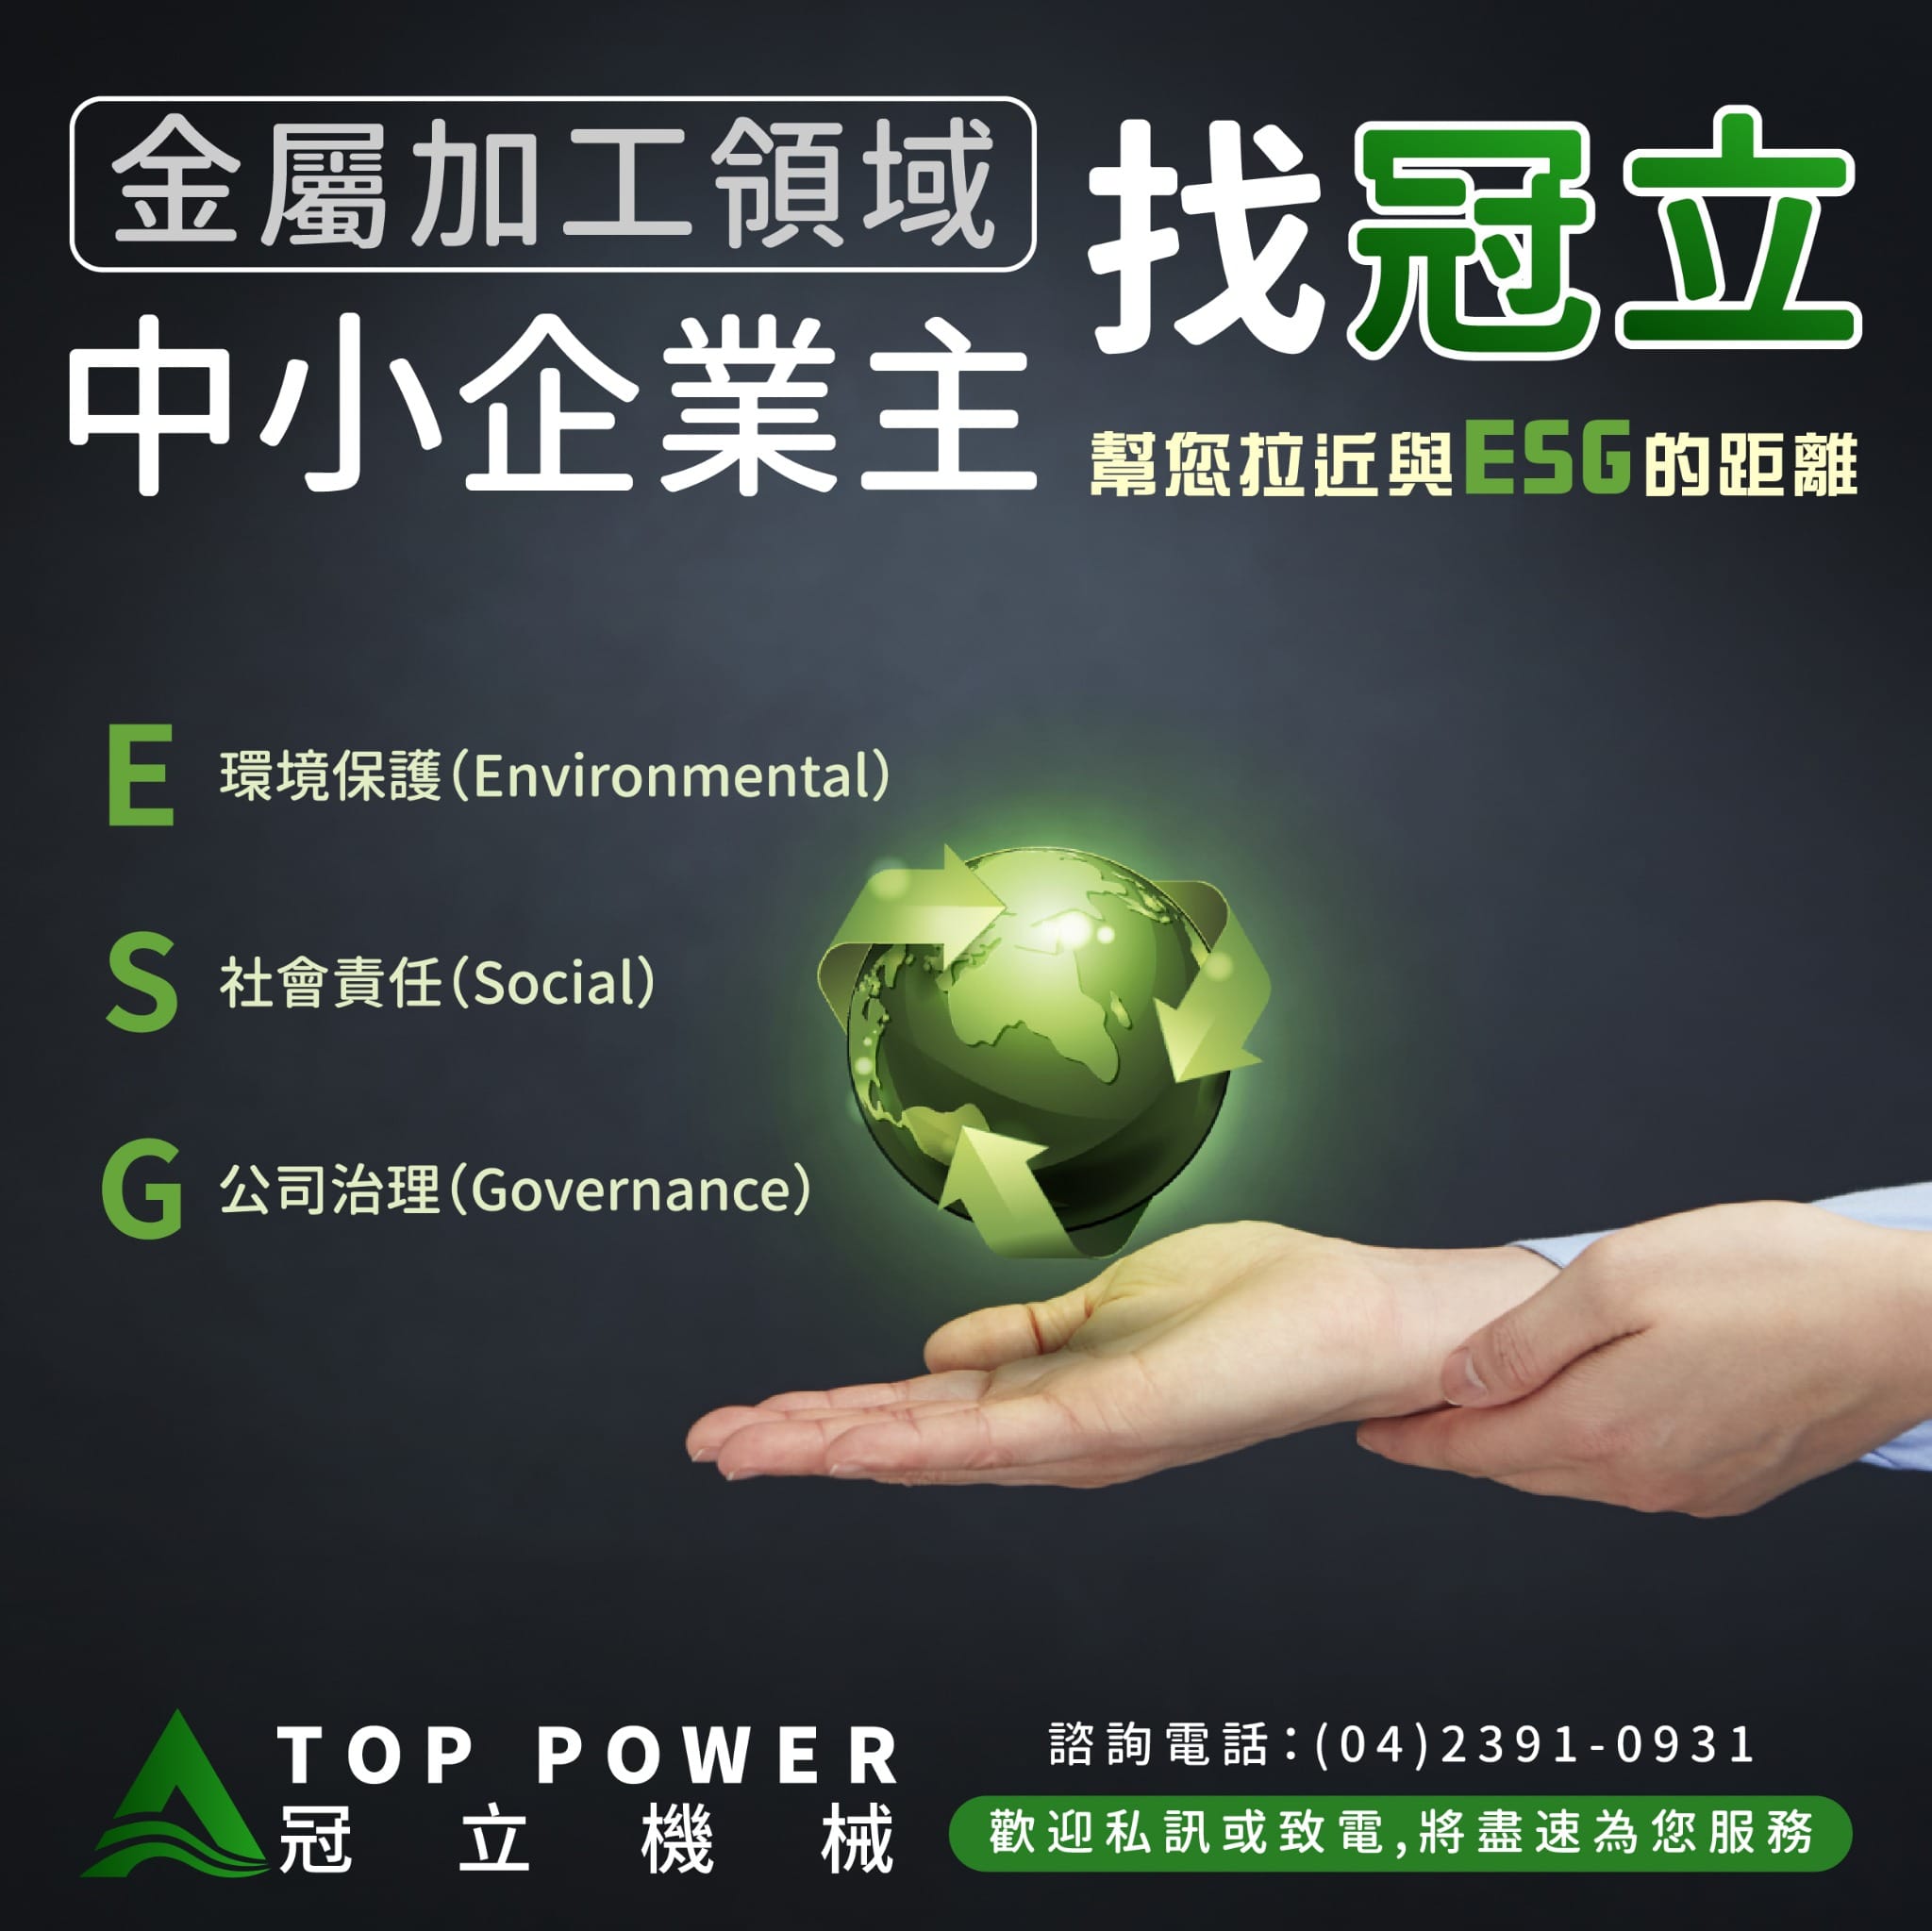 Let's create green manufacture together!